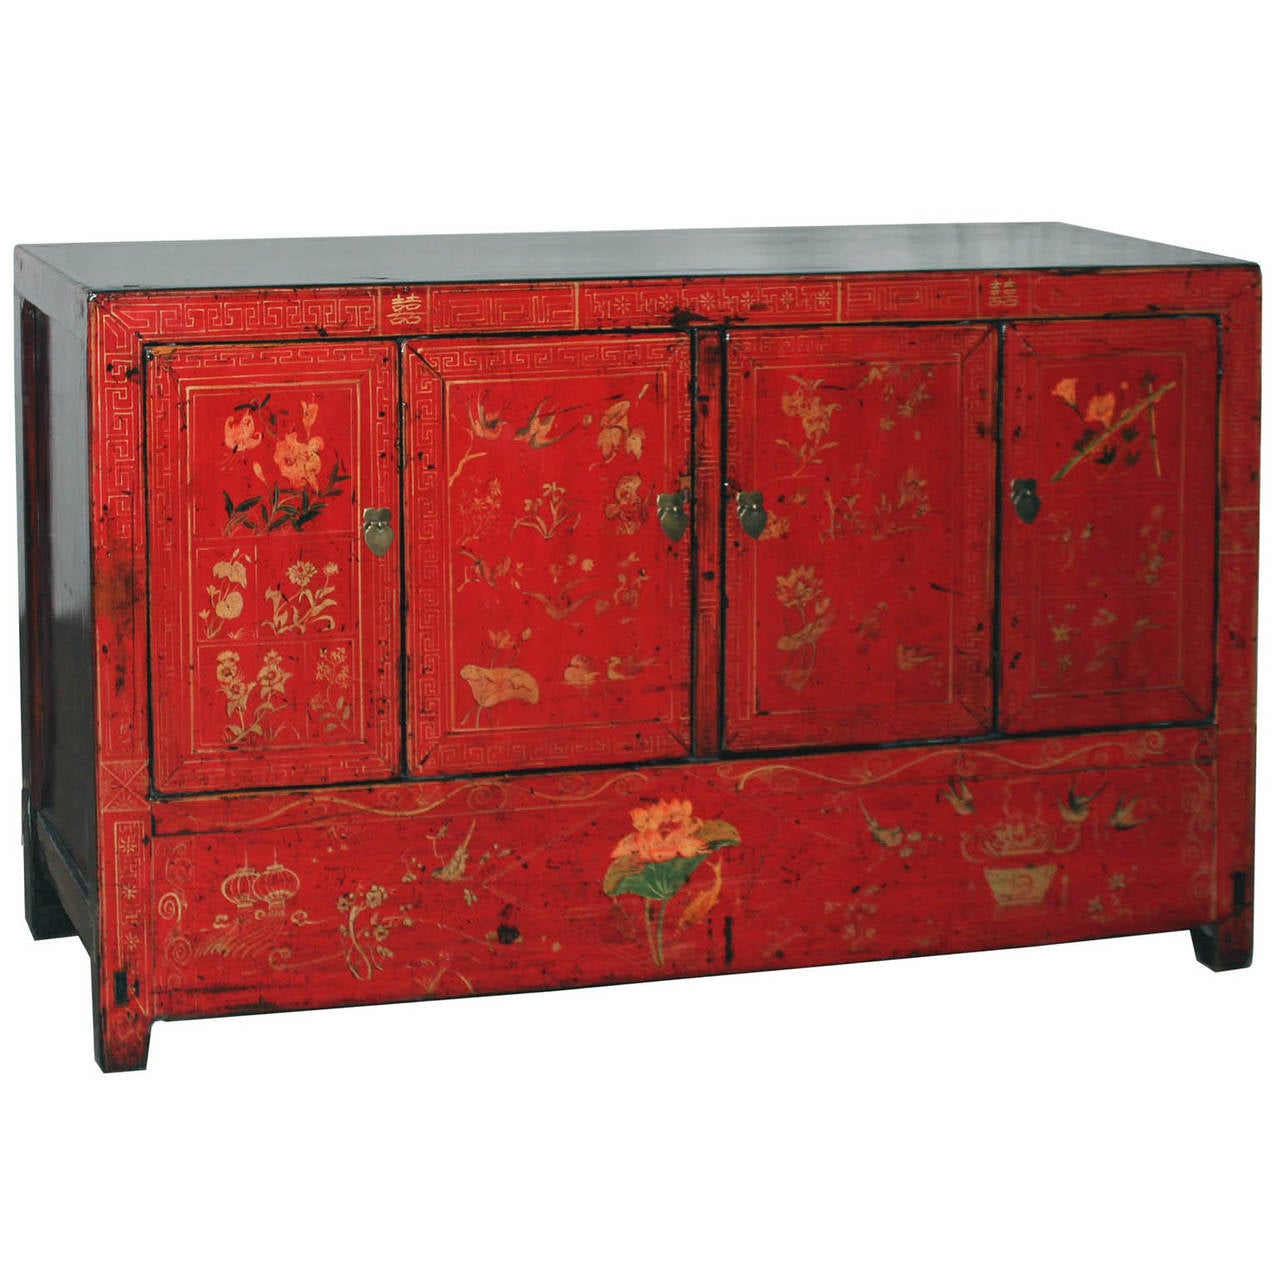 Four-door red lacquered wedding buffet with hand-painted gold leaf love birds, lotus flowers, cherry blossoms and double happiness characters, symbolizing prosperity and red representing happiness. New interior shelf and hardware. Middle bar removes